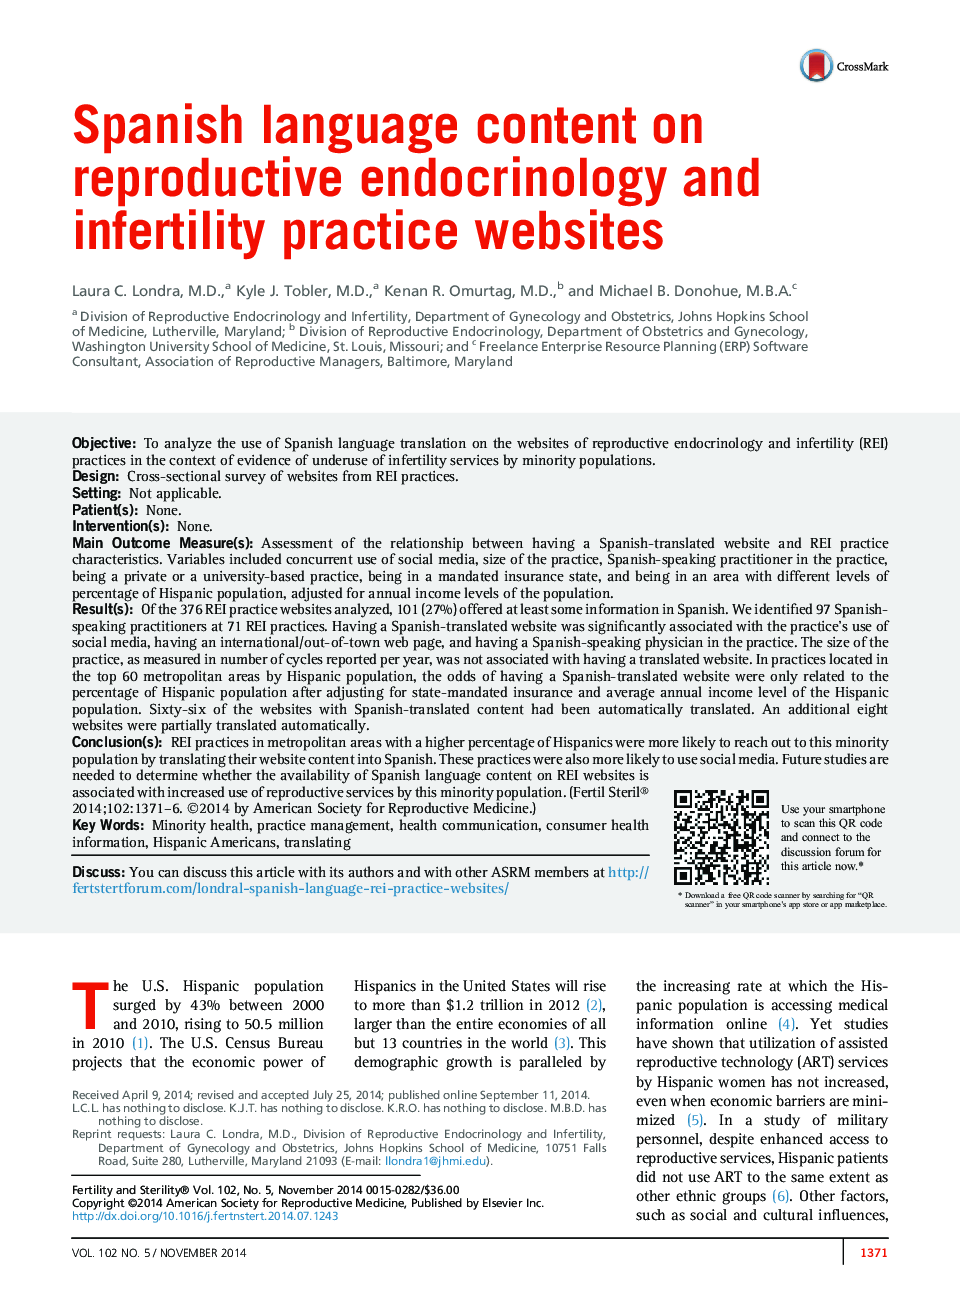 Spanish language content on reproductive endocrinology and infertility practice websites